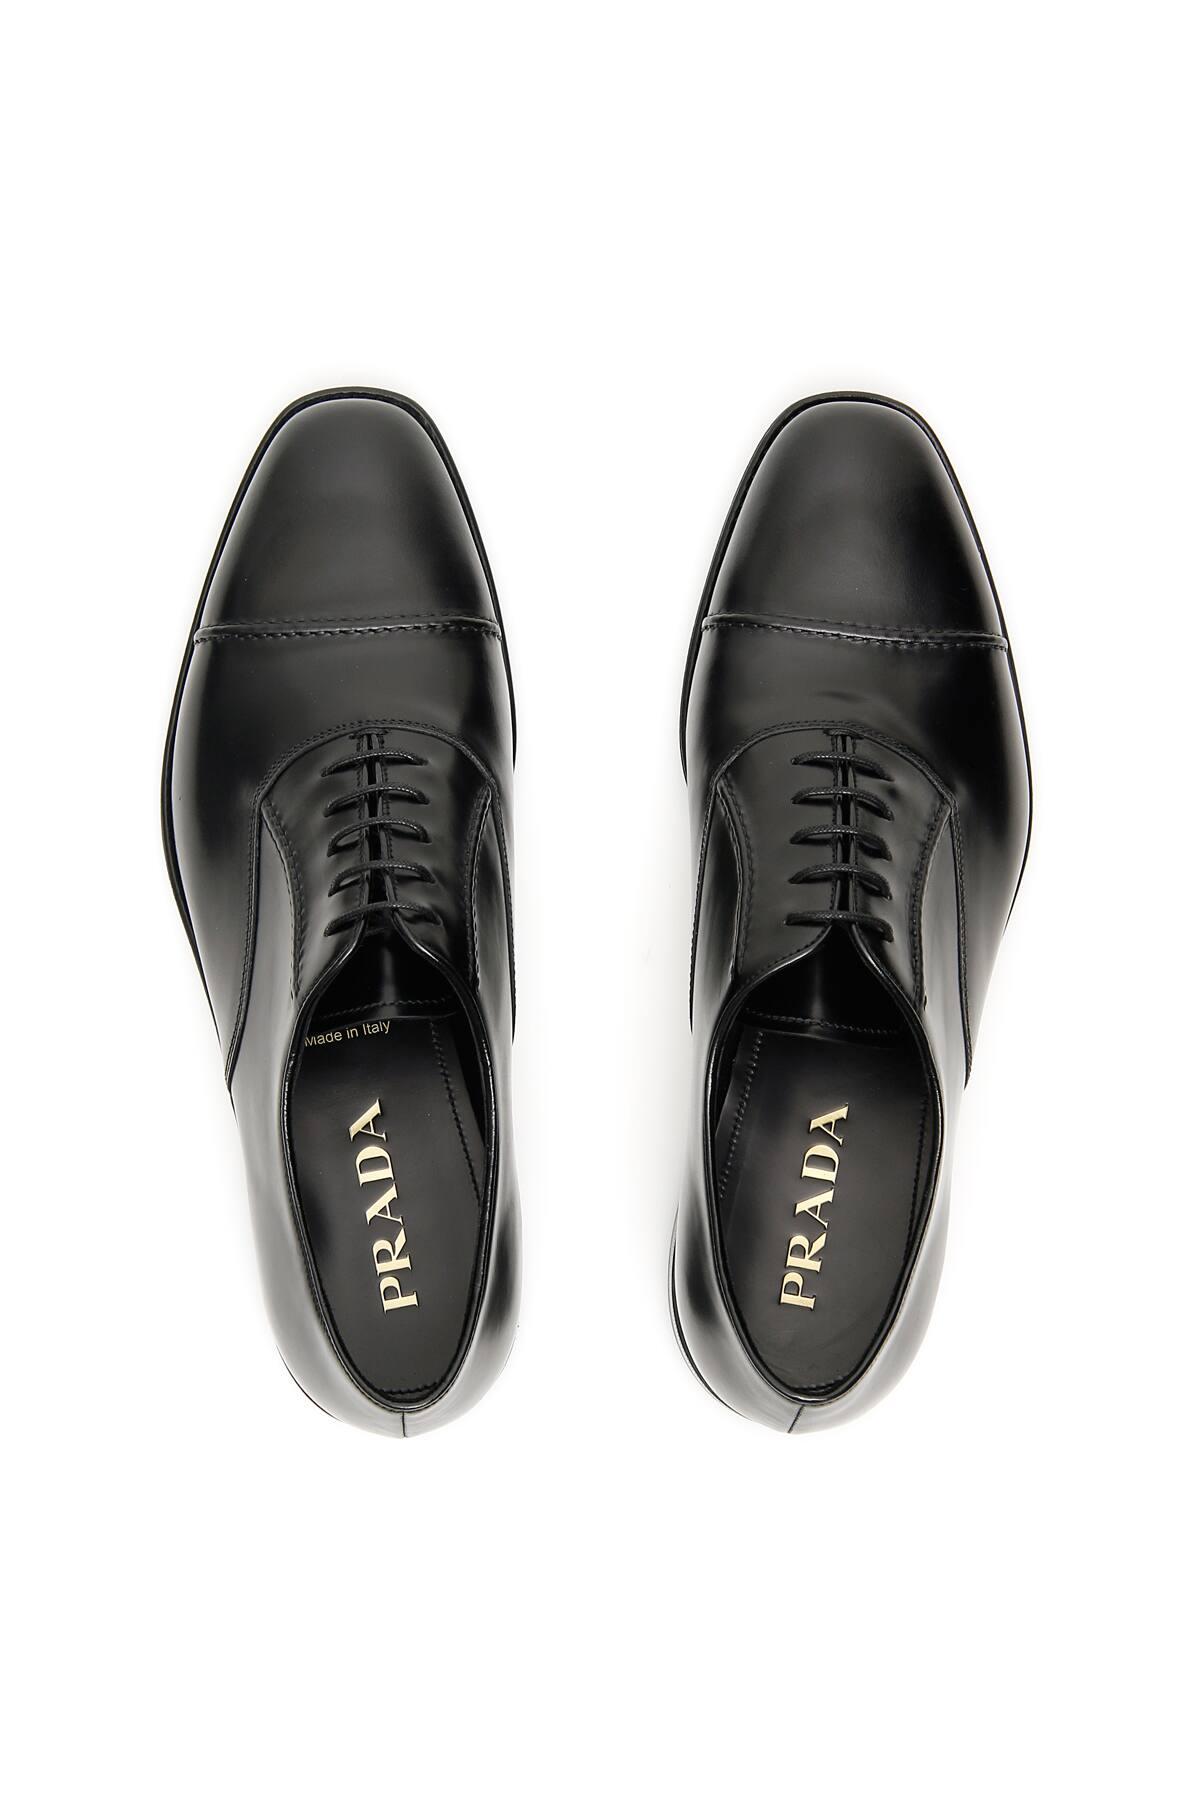 Prada Leather Oxford Lace-ups in Black for Men - Lyst